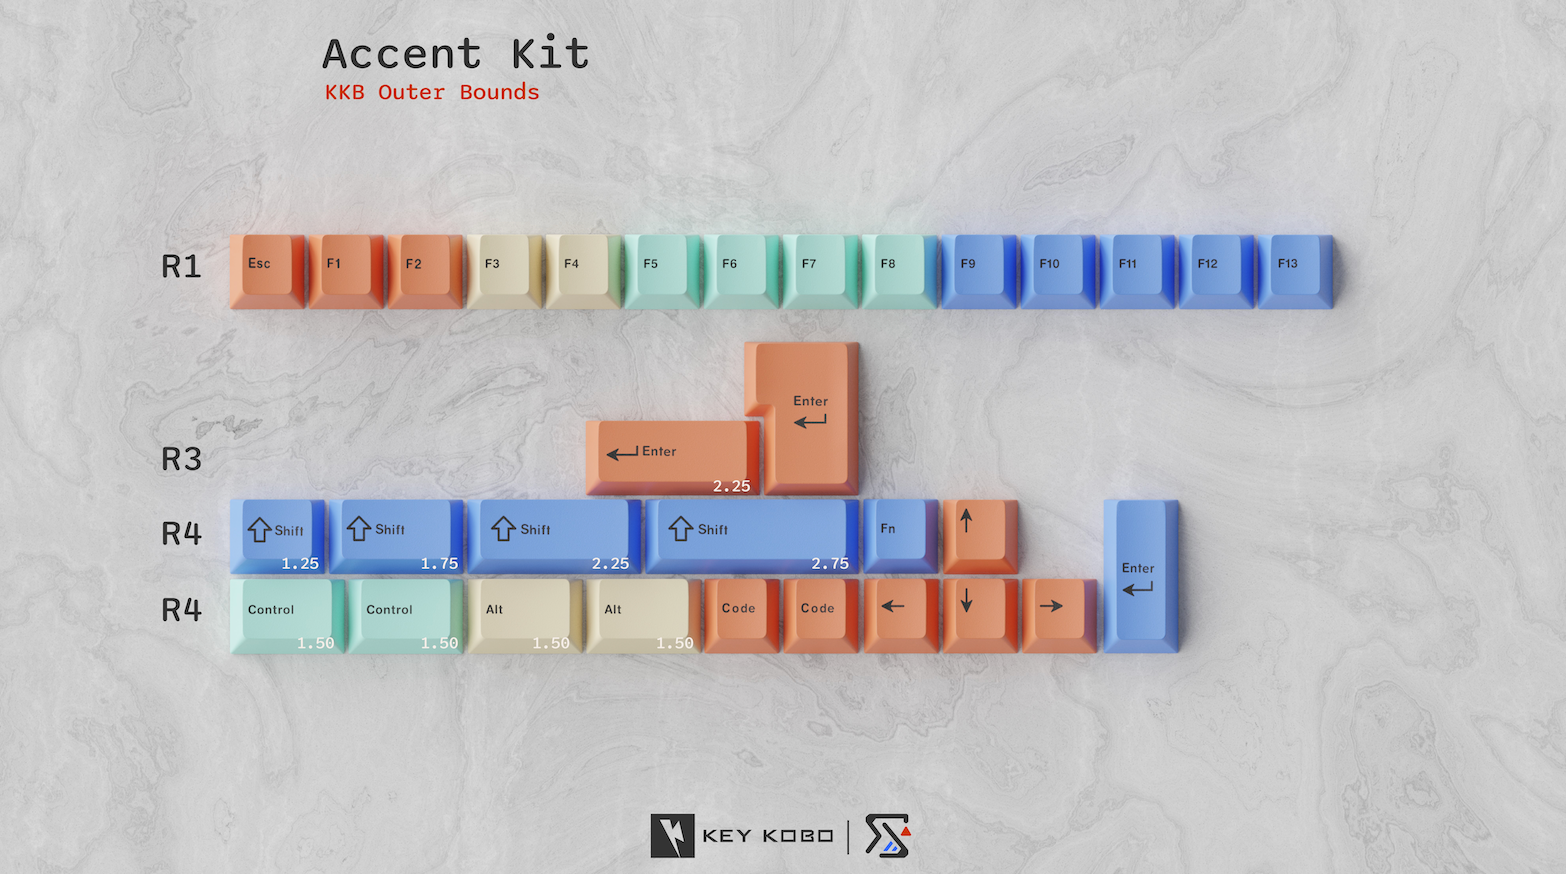 [GB] Keykobo Outer Bounds